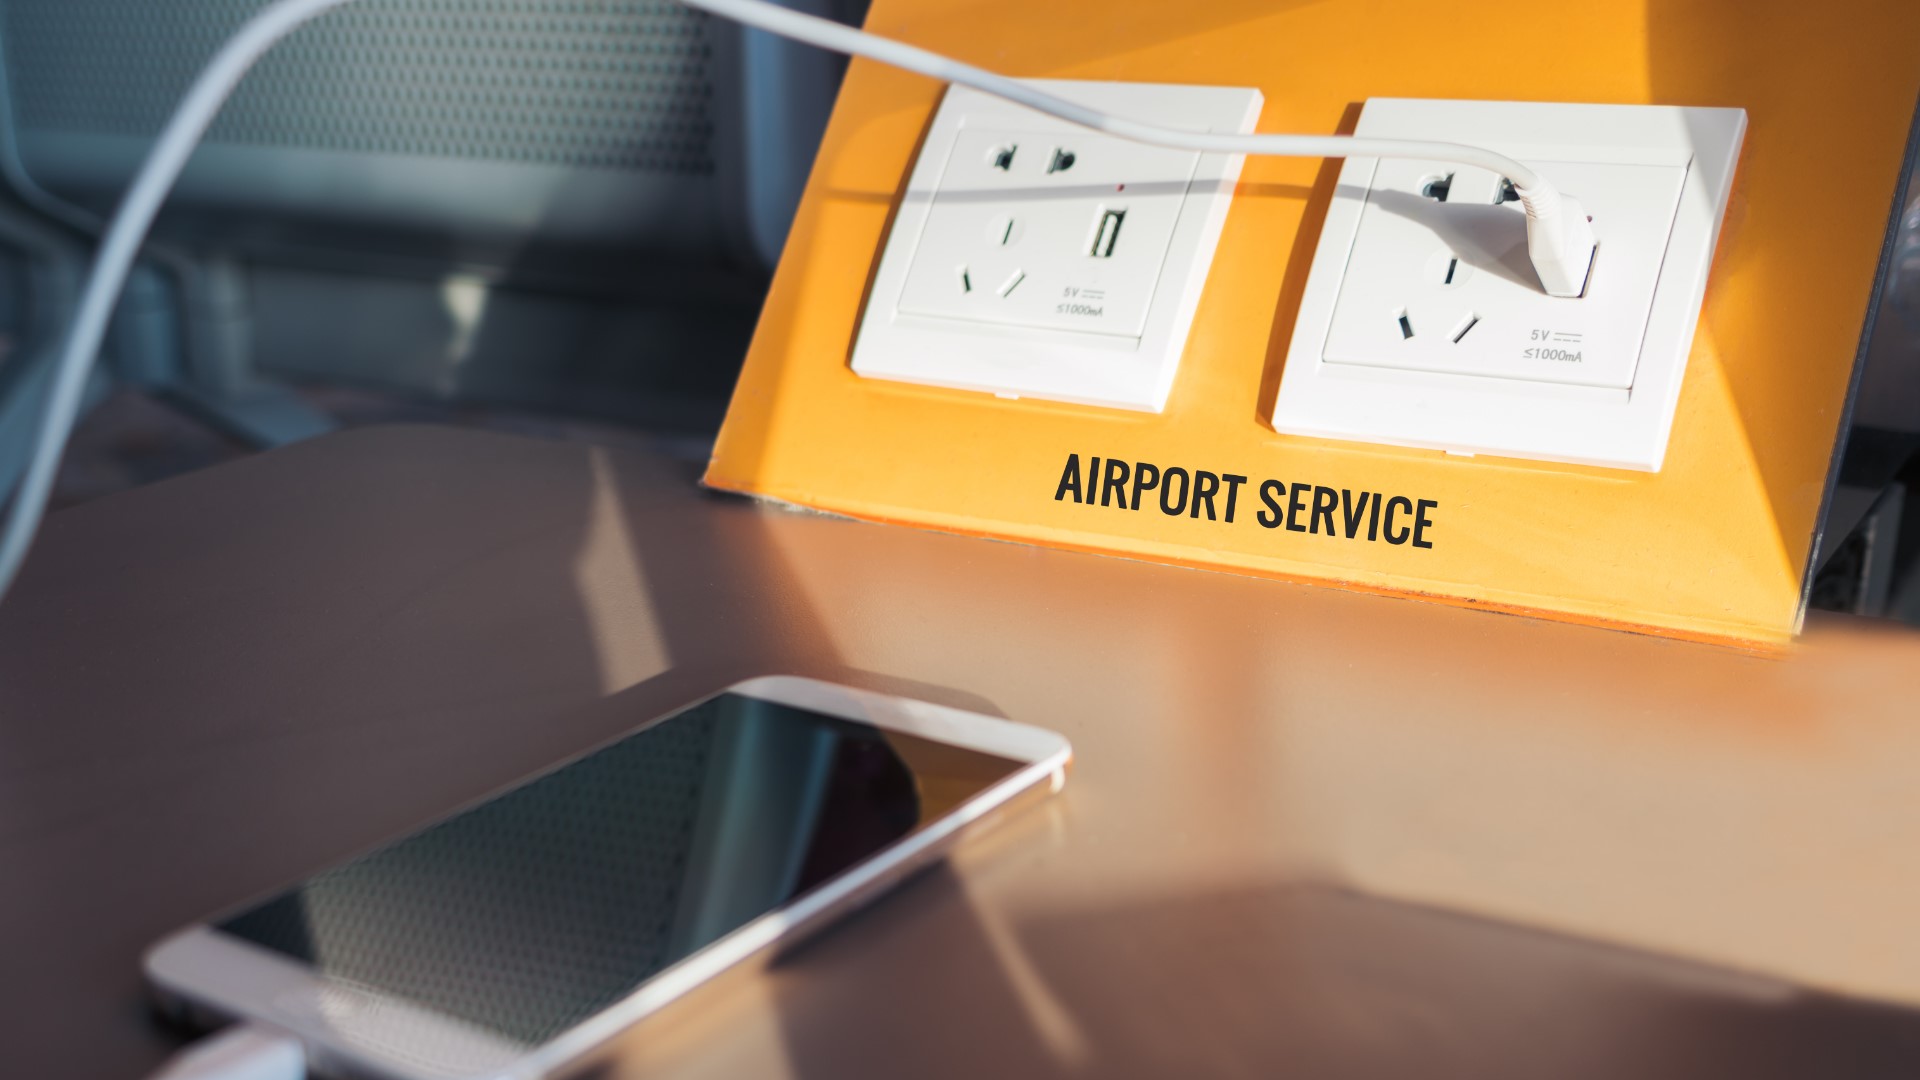 We've all had our phones run out of juice at the airport. Is it actually safe to plug your charger into one of the airport USBs?